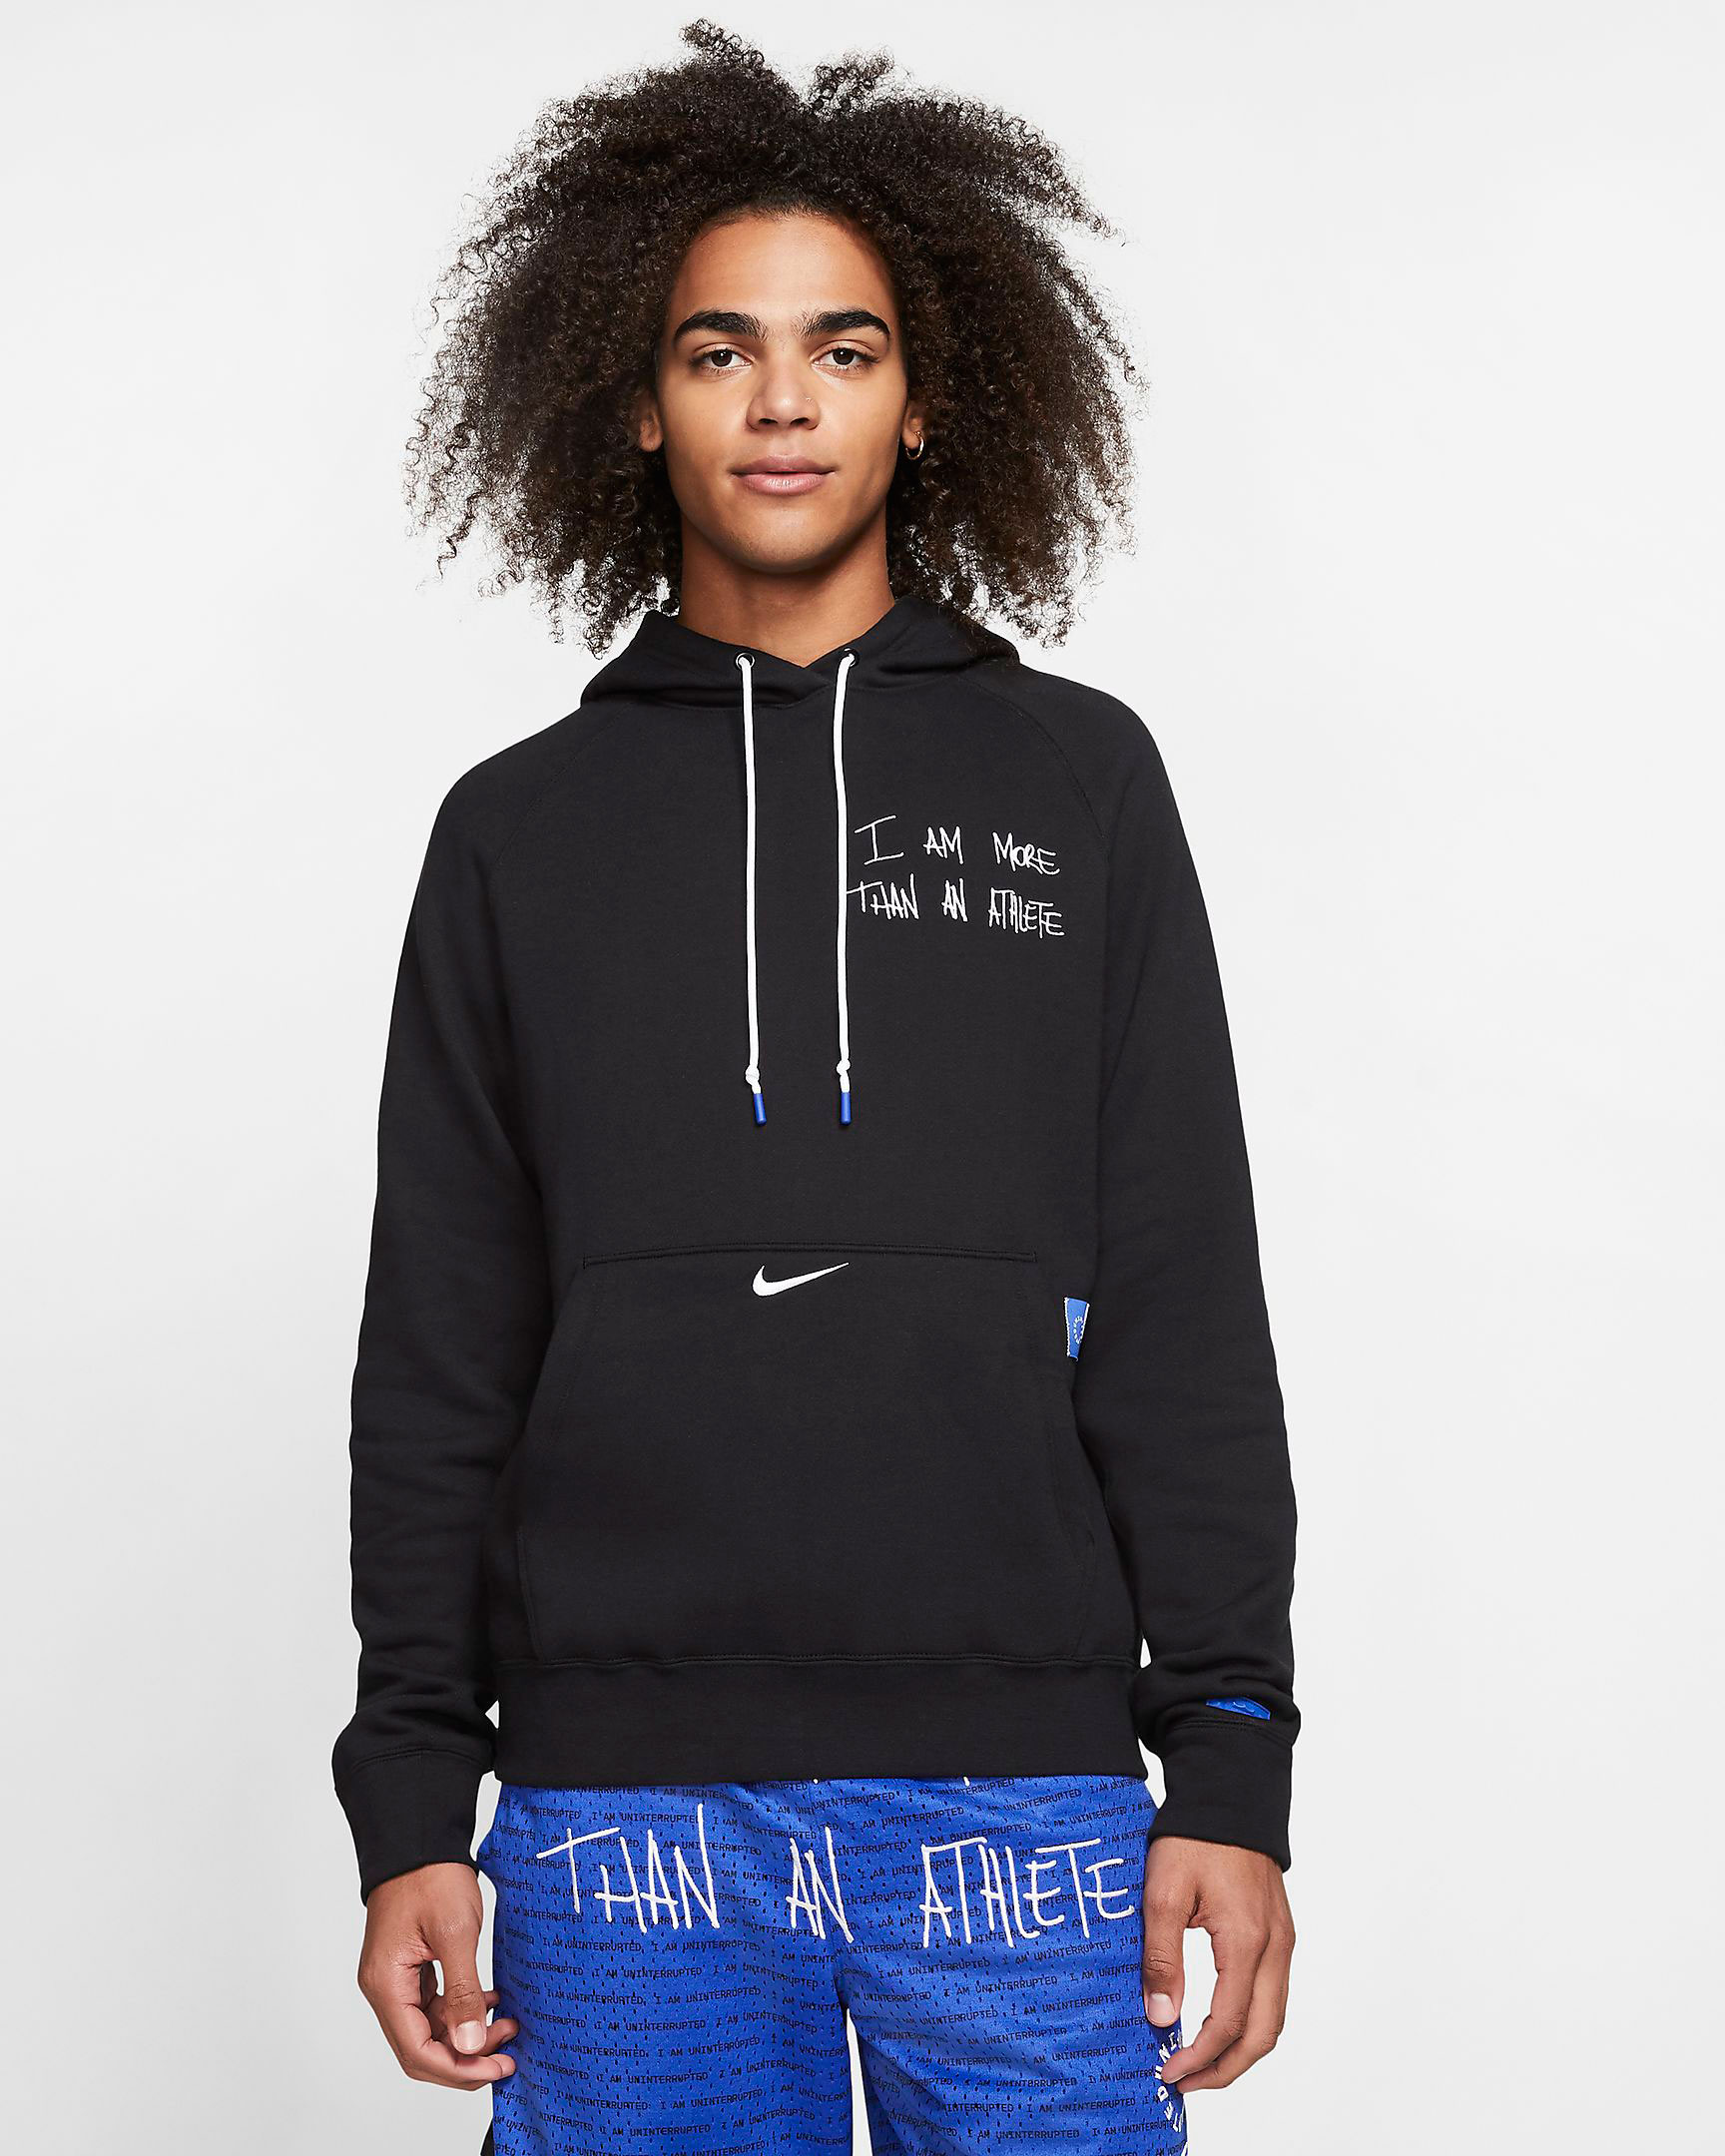 nike-lebron-more-than-an-athlete-uninterrupted-hoodie-1